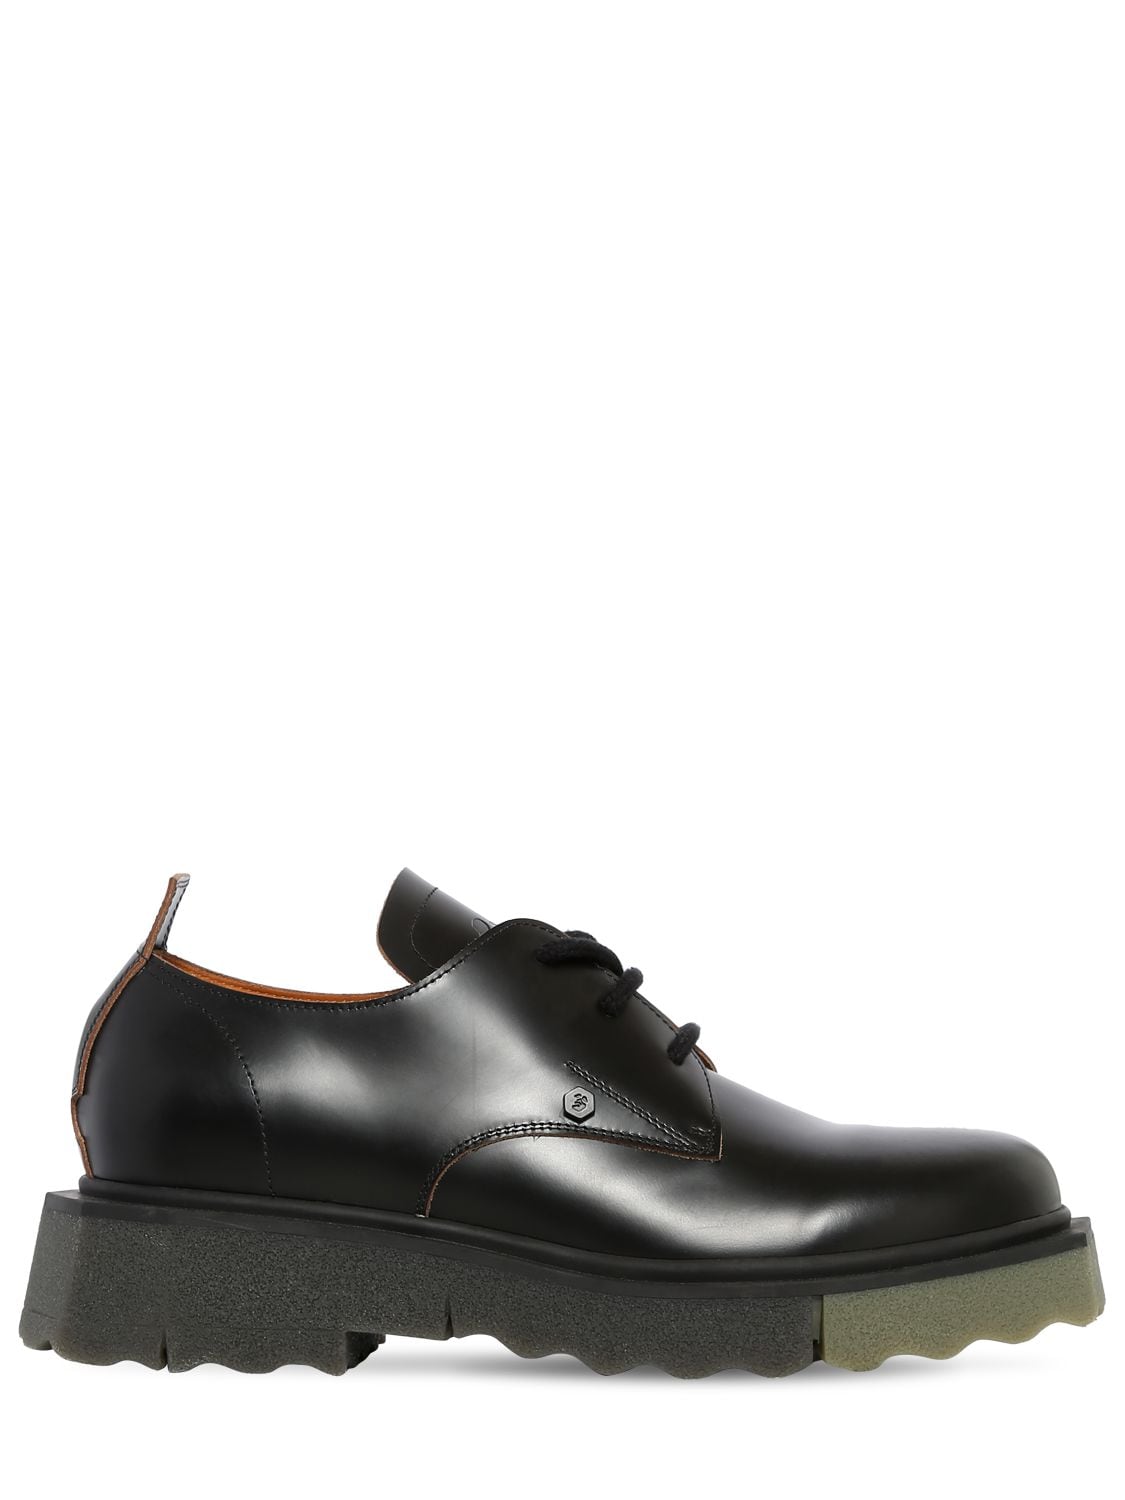 OFF-WHITE SPONGE SOLE LEATHER DERBY LACE-UP SHOES